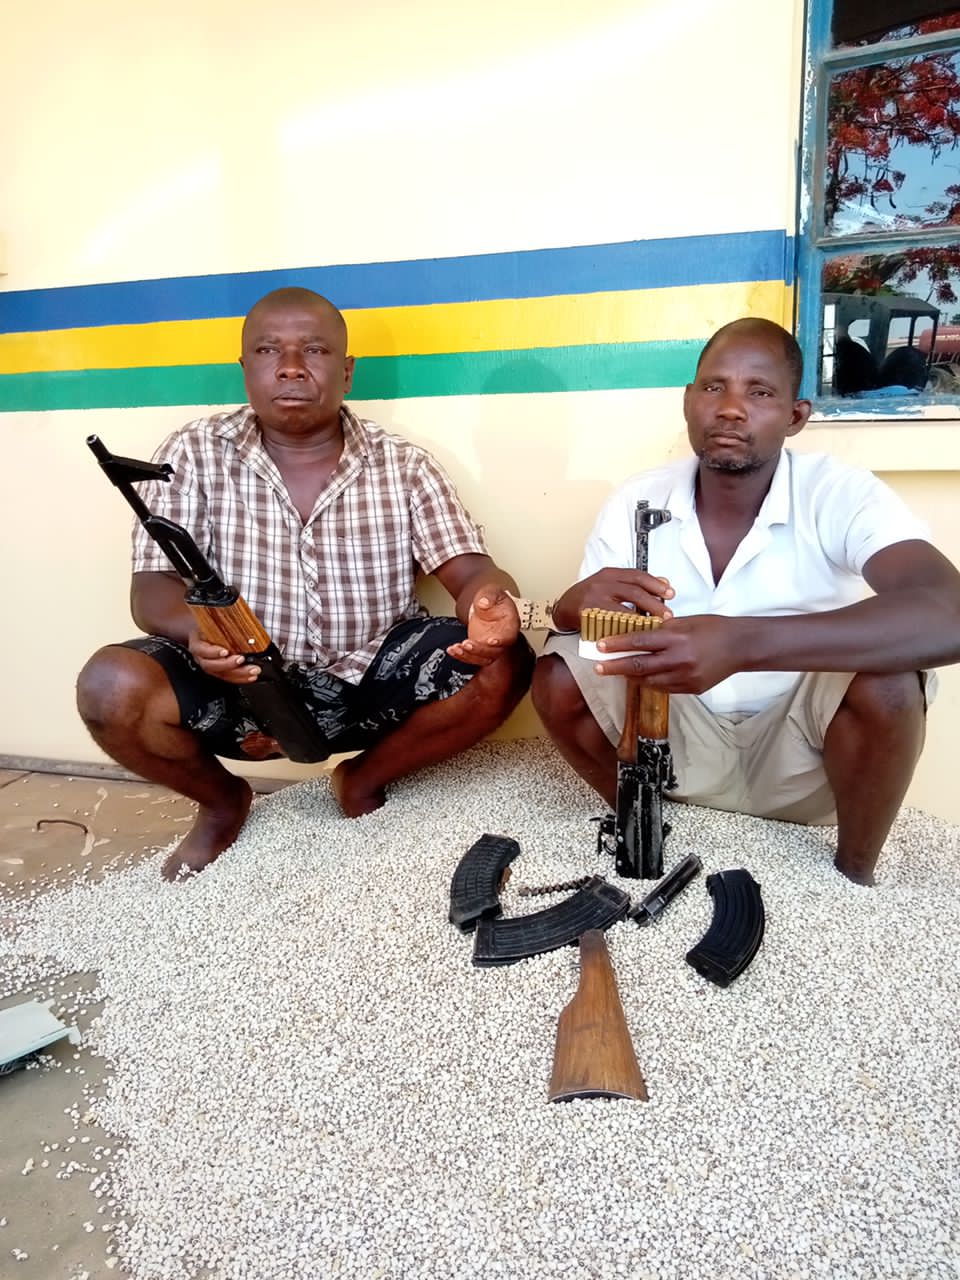 FIB-IRT intercepts illegal arms and ammunition supplies to South-East